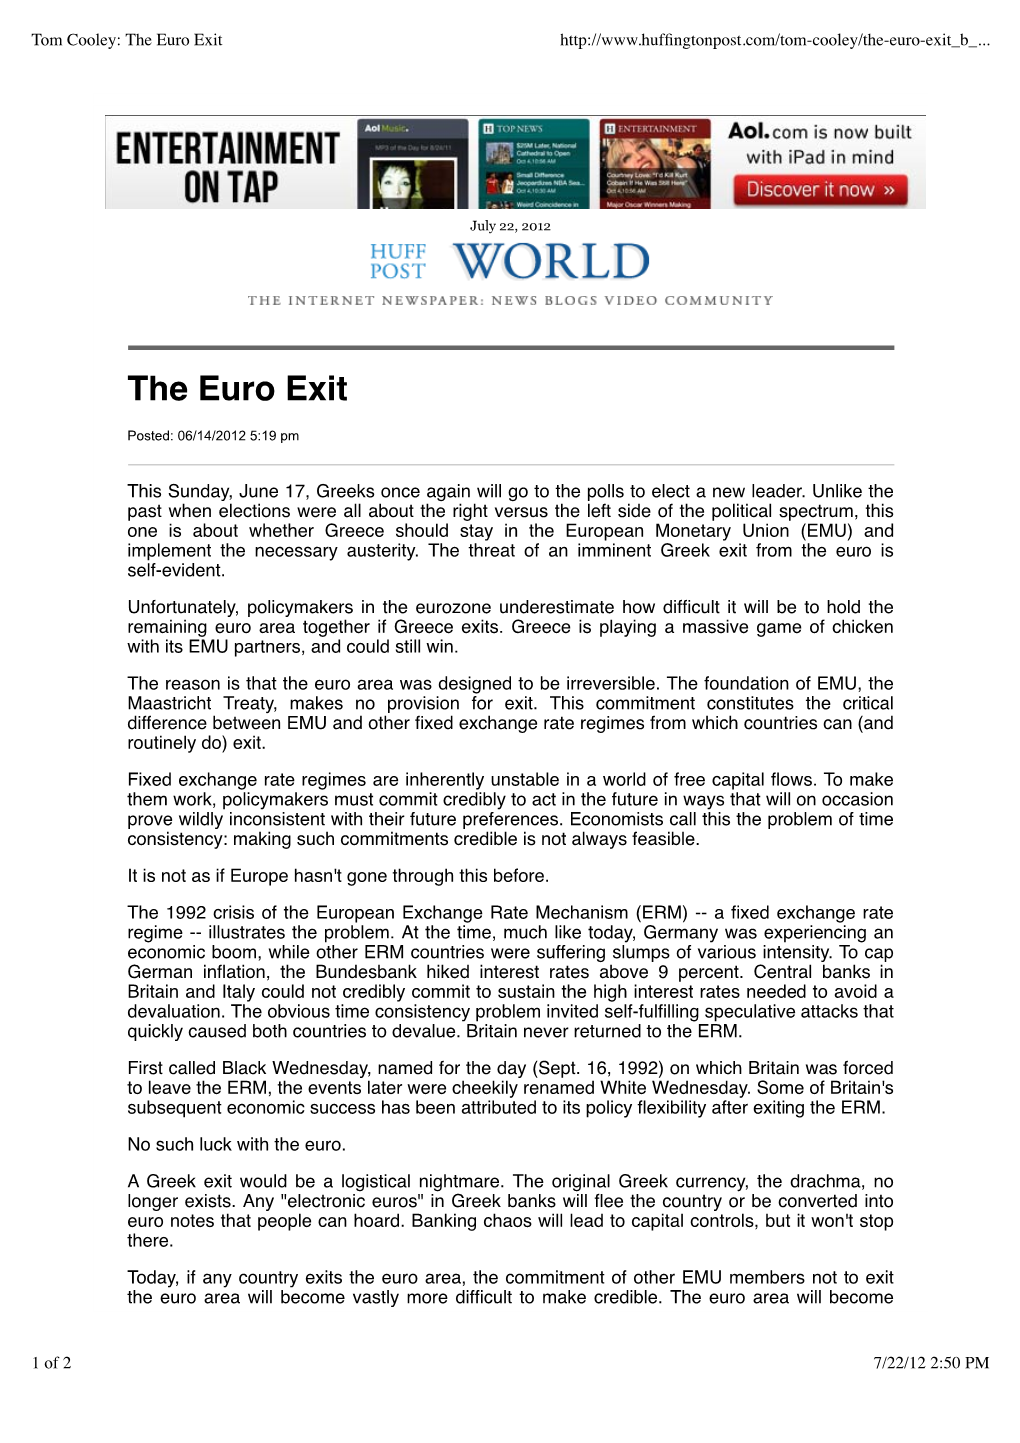 Tom Cooley: the Euro Exit